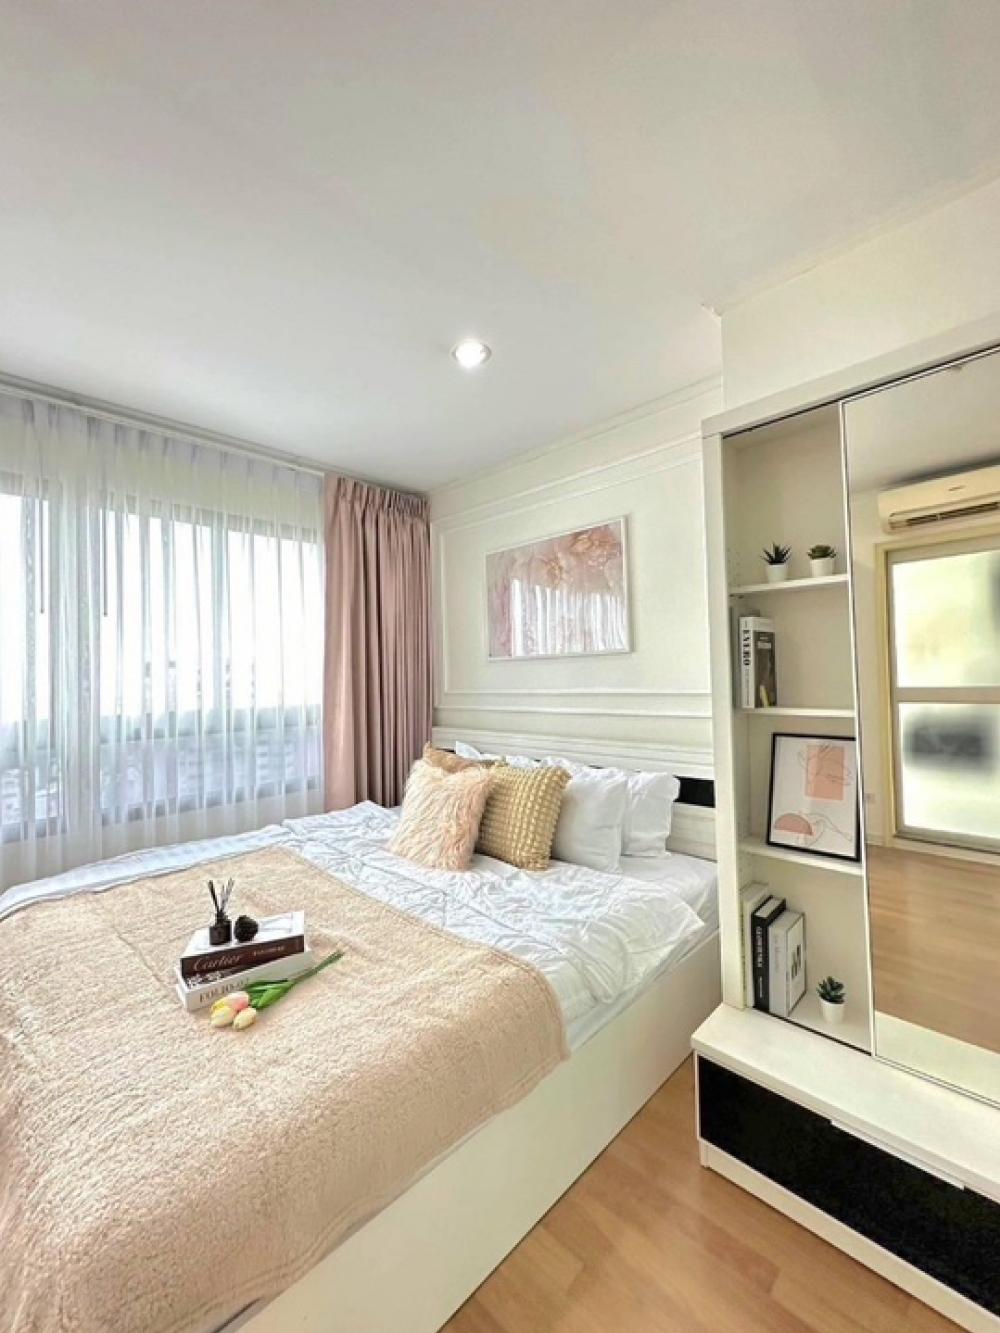 For SaleCondoPinklao, Charansanitwong : ✅ Condo for sale Lumpini place pinklao 2 (Lumpini Place Pinklao 2) size 31.xx sq m., 14th floor, 1 bedroom, 1 bathroom, 1 kitchen, price 1,990,000 baht 💠 beautifully decorated, complete, ready to move in 🚇 Bang Yi Khan Station 🛎 hurry and reserve now.